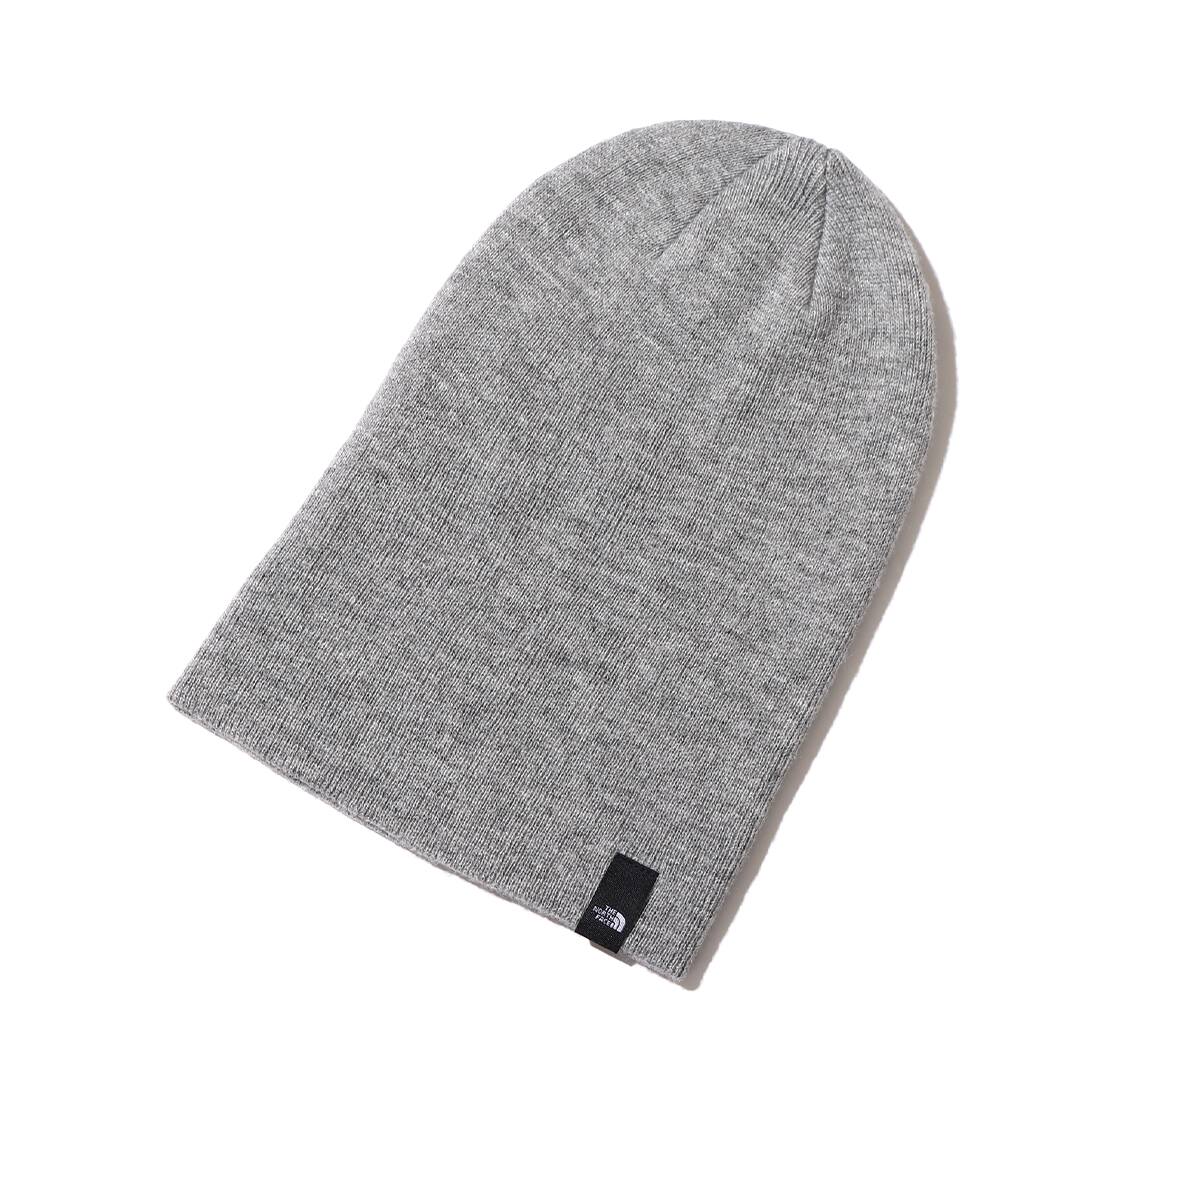 THE NORTH FACE BULLET BEANIE ミックスグレー 22FW-I